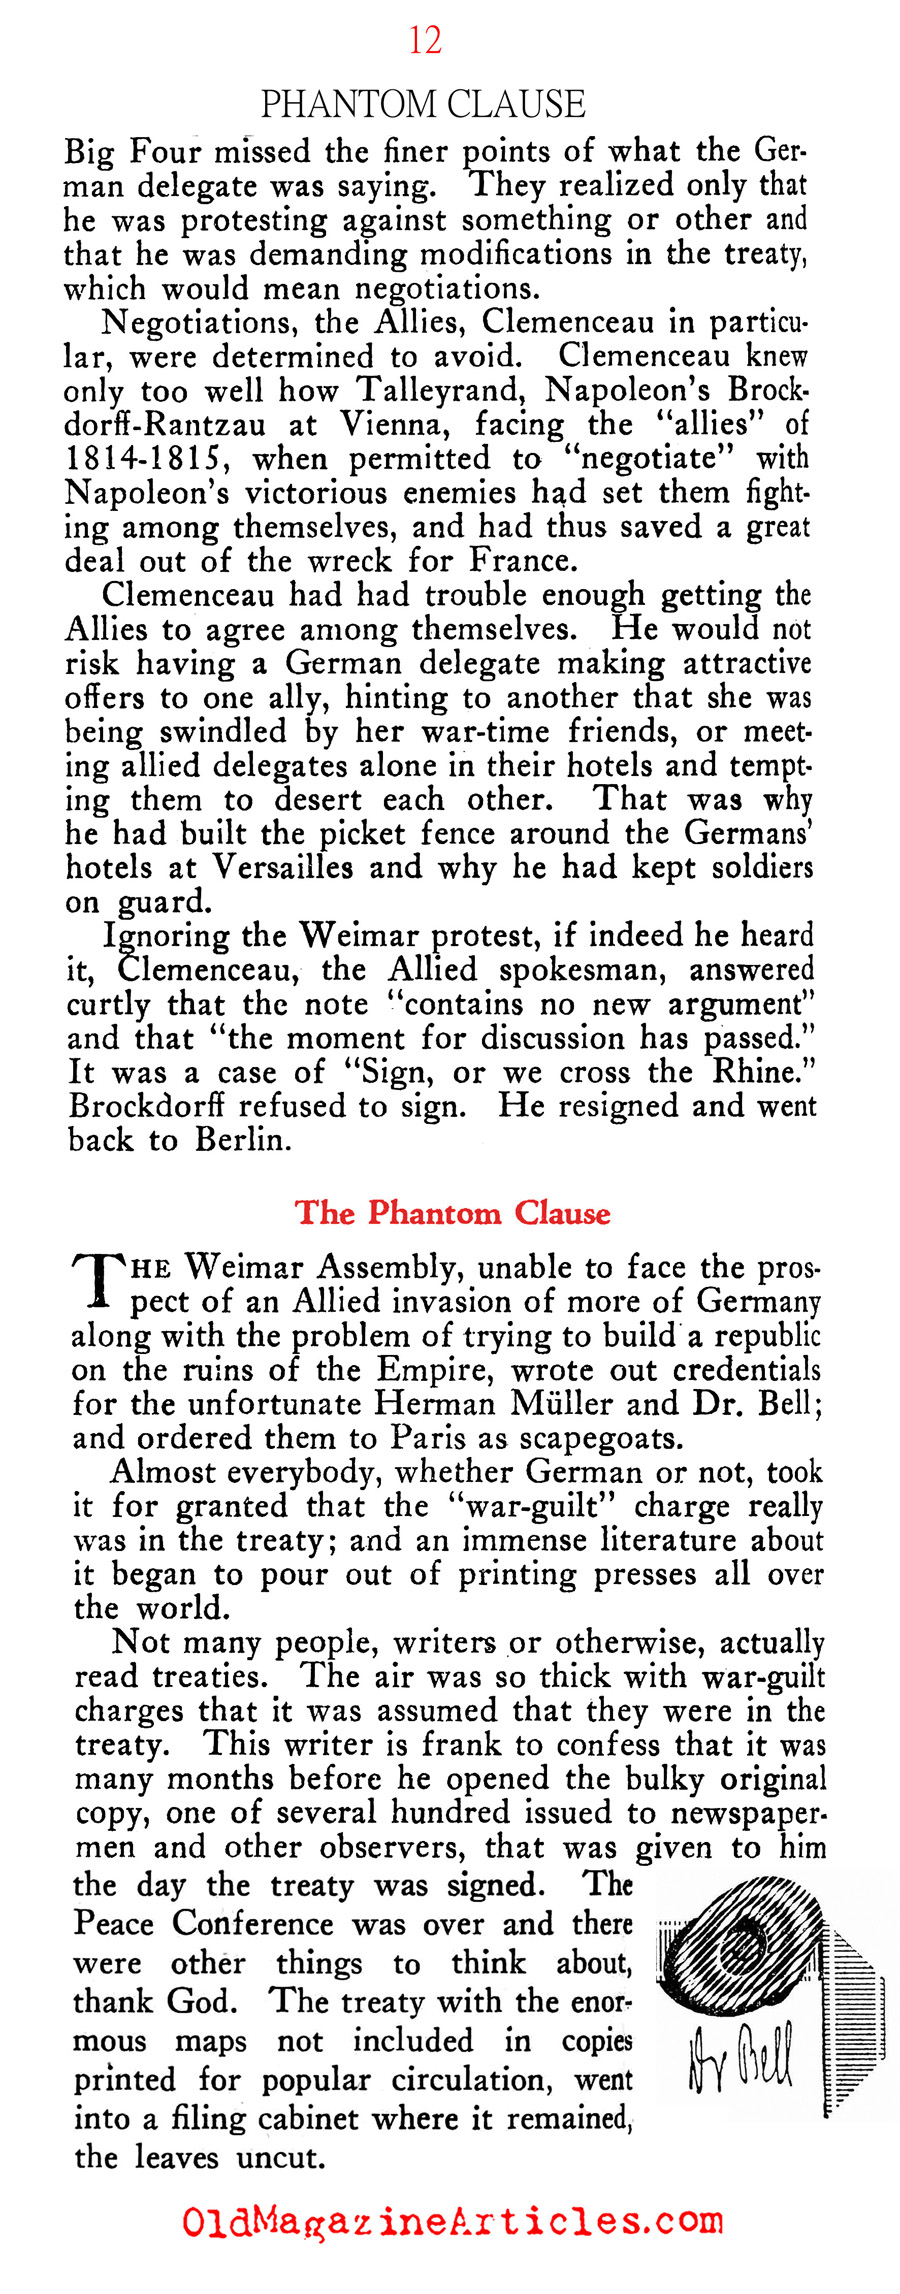 The Mistranslated Clause (New Outlook Magazine, 1935)